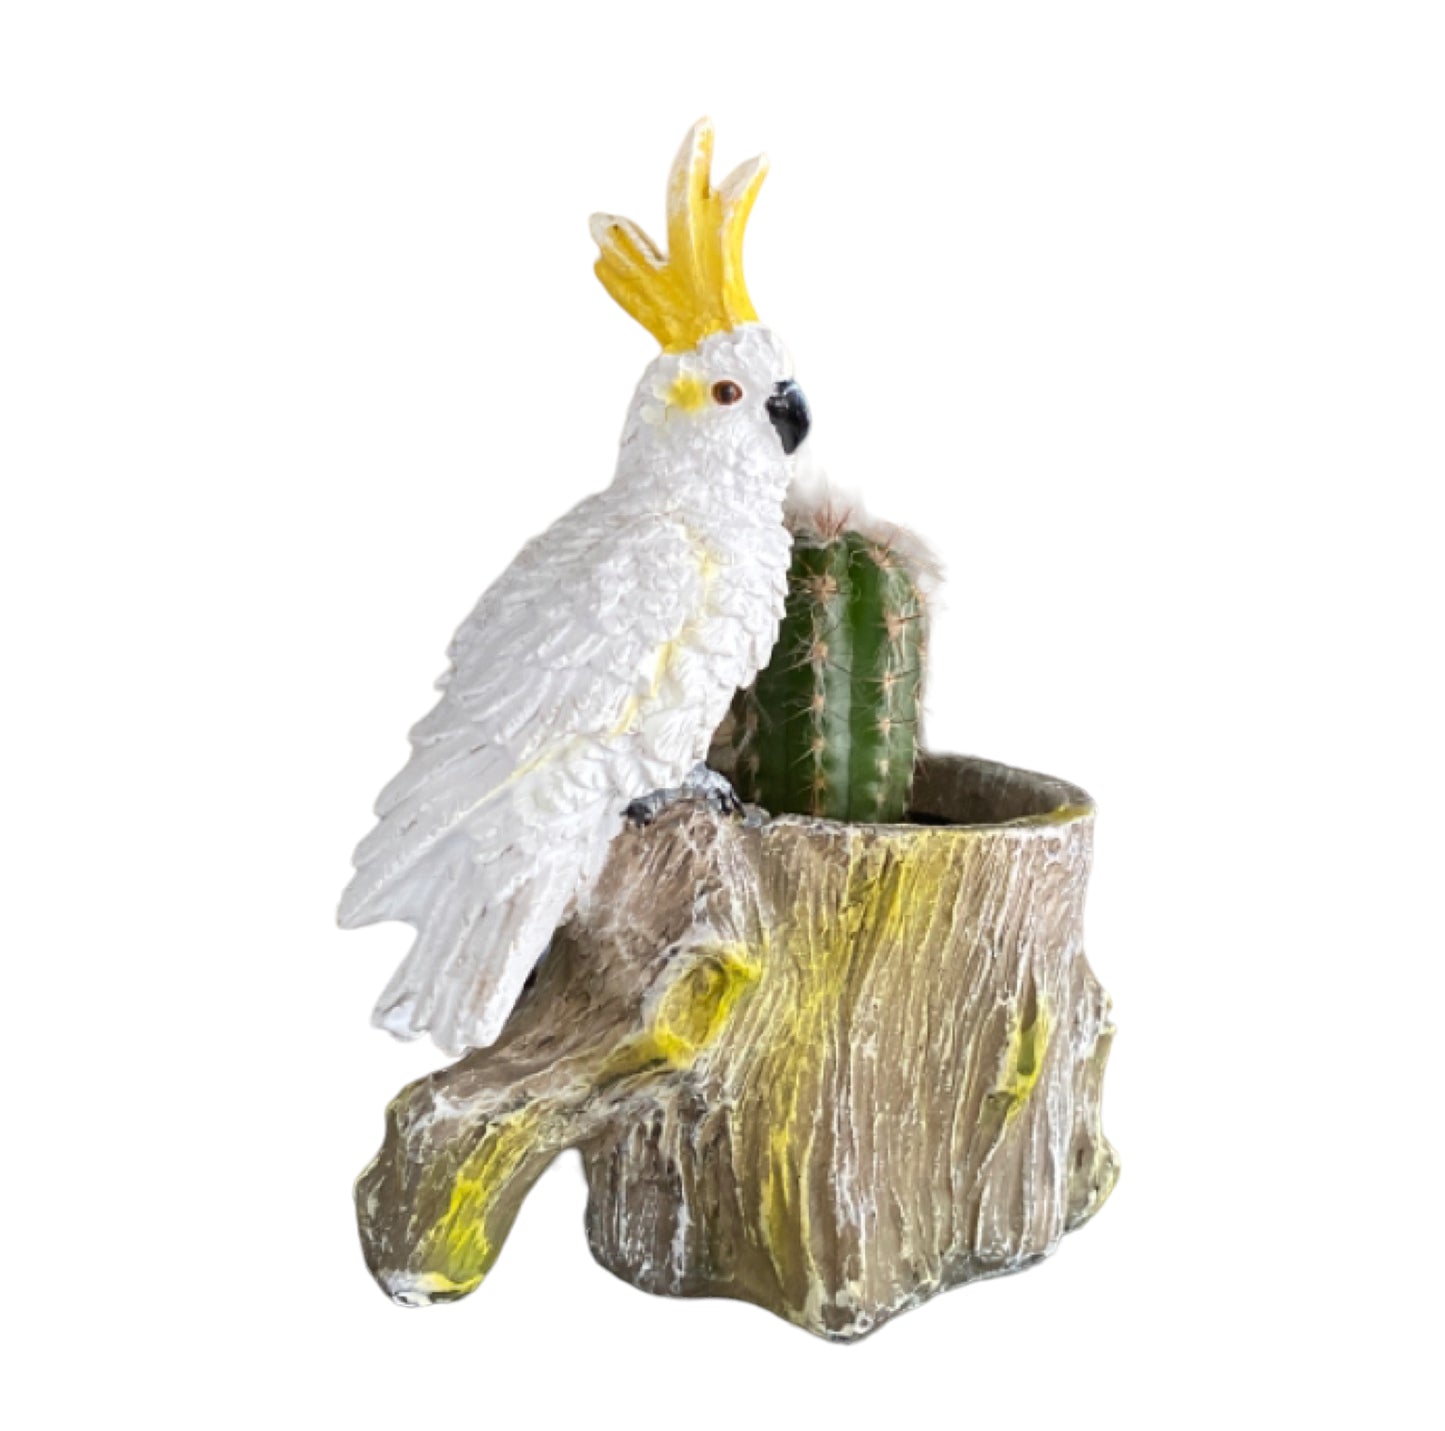 Plant Pot Planter Cockatoo - The Renmy Store Homewares & Gifts 